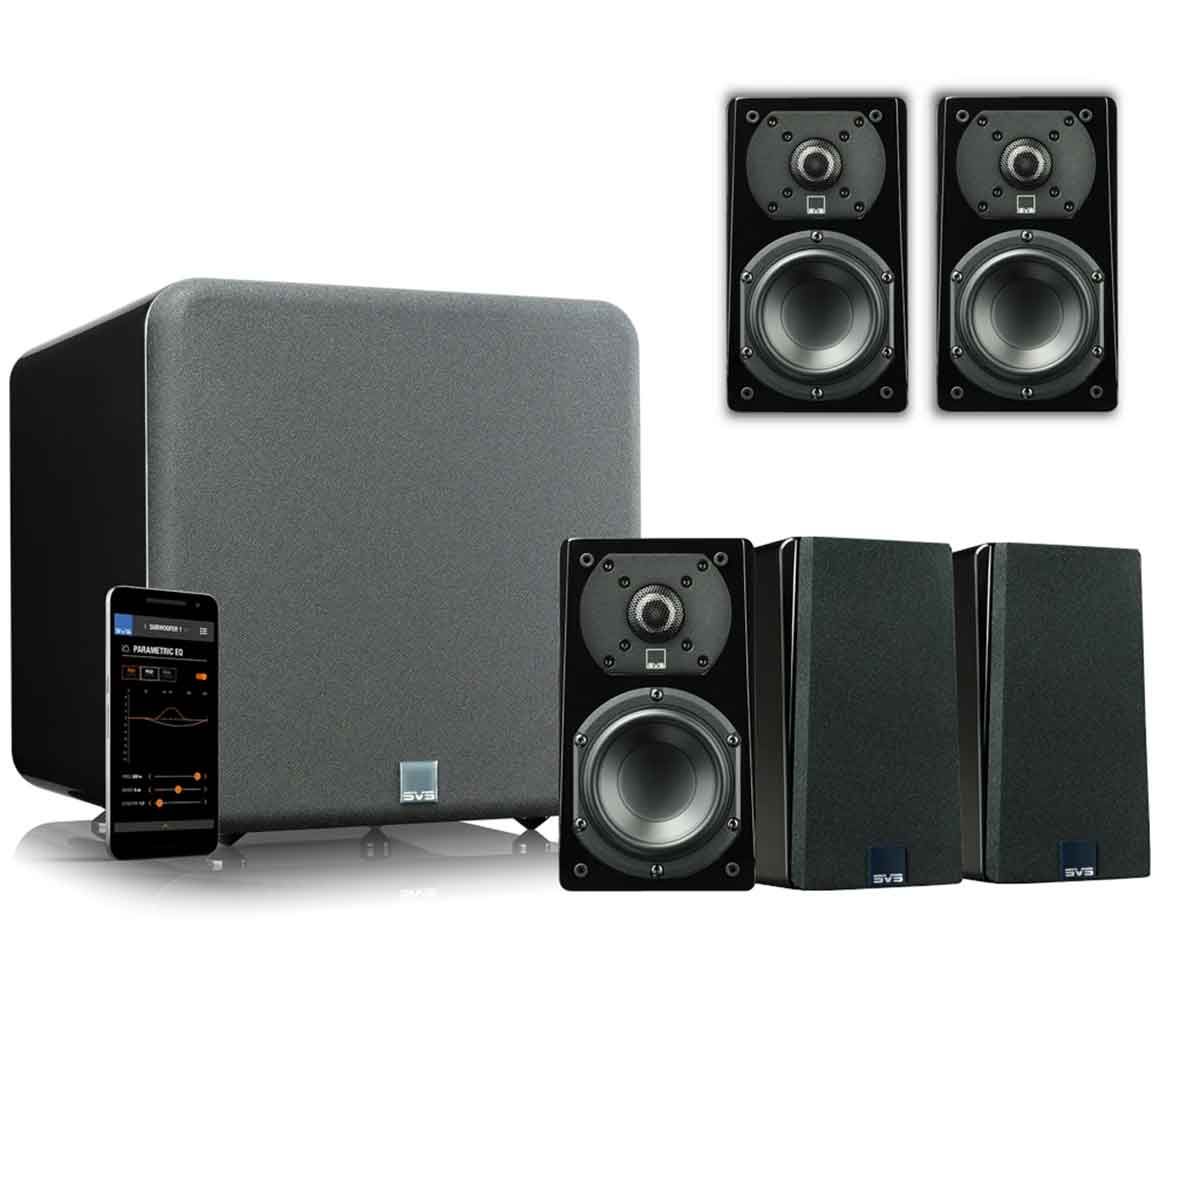 SVS Satellite Surround Sound System with SVS Satellite Speakers and SB-1000 Pro Subwoofer in Black color with the SVS app installed on a smartphone.